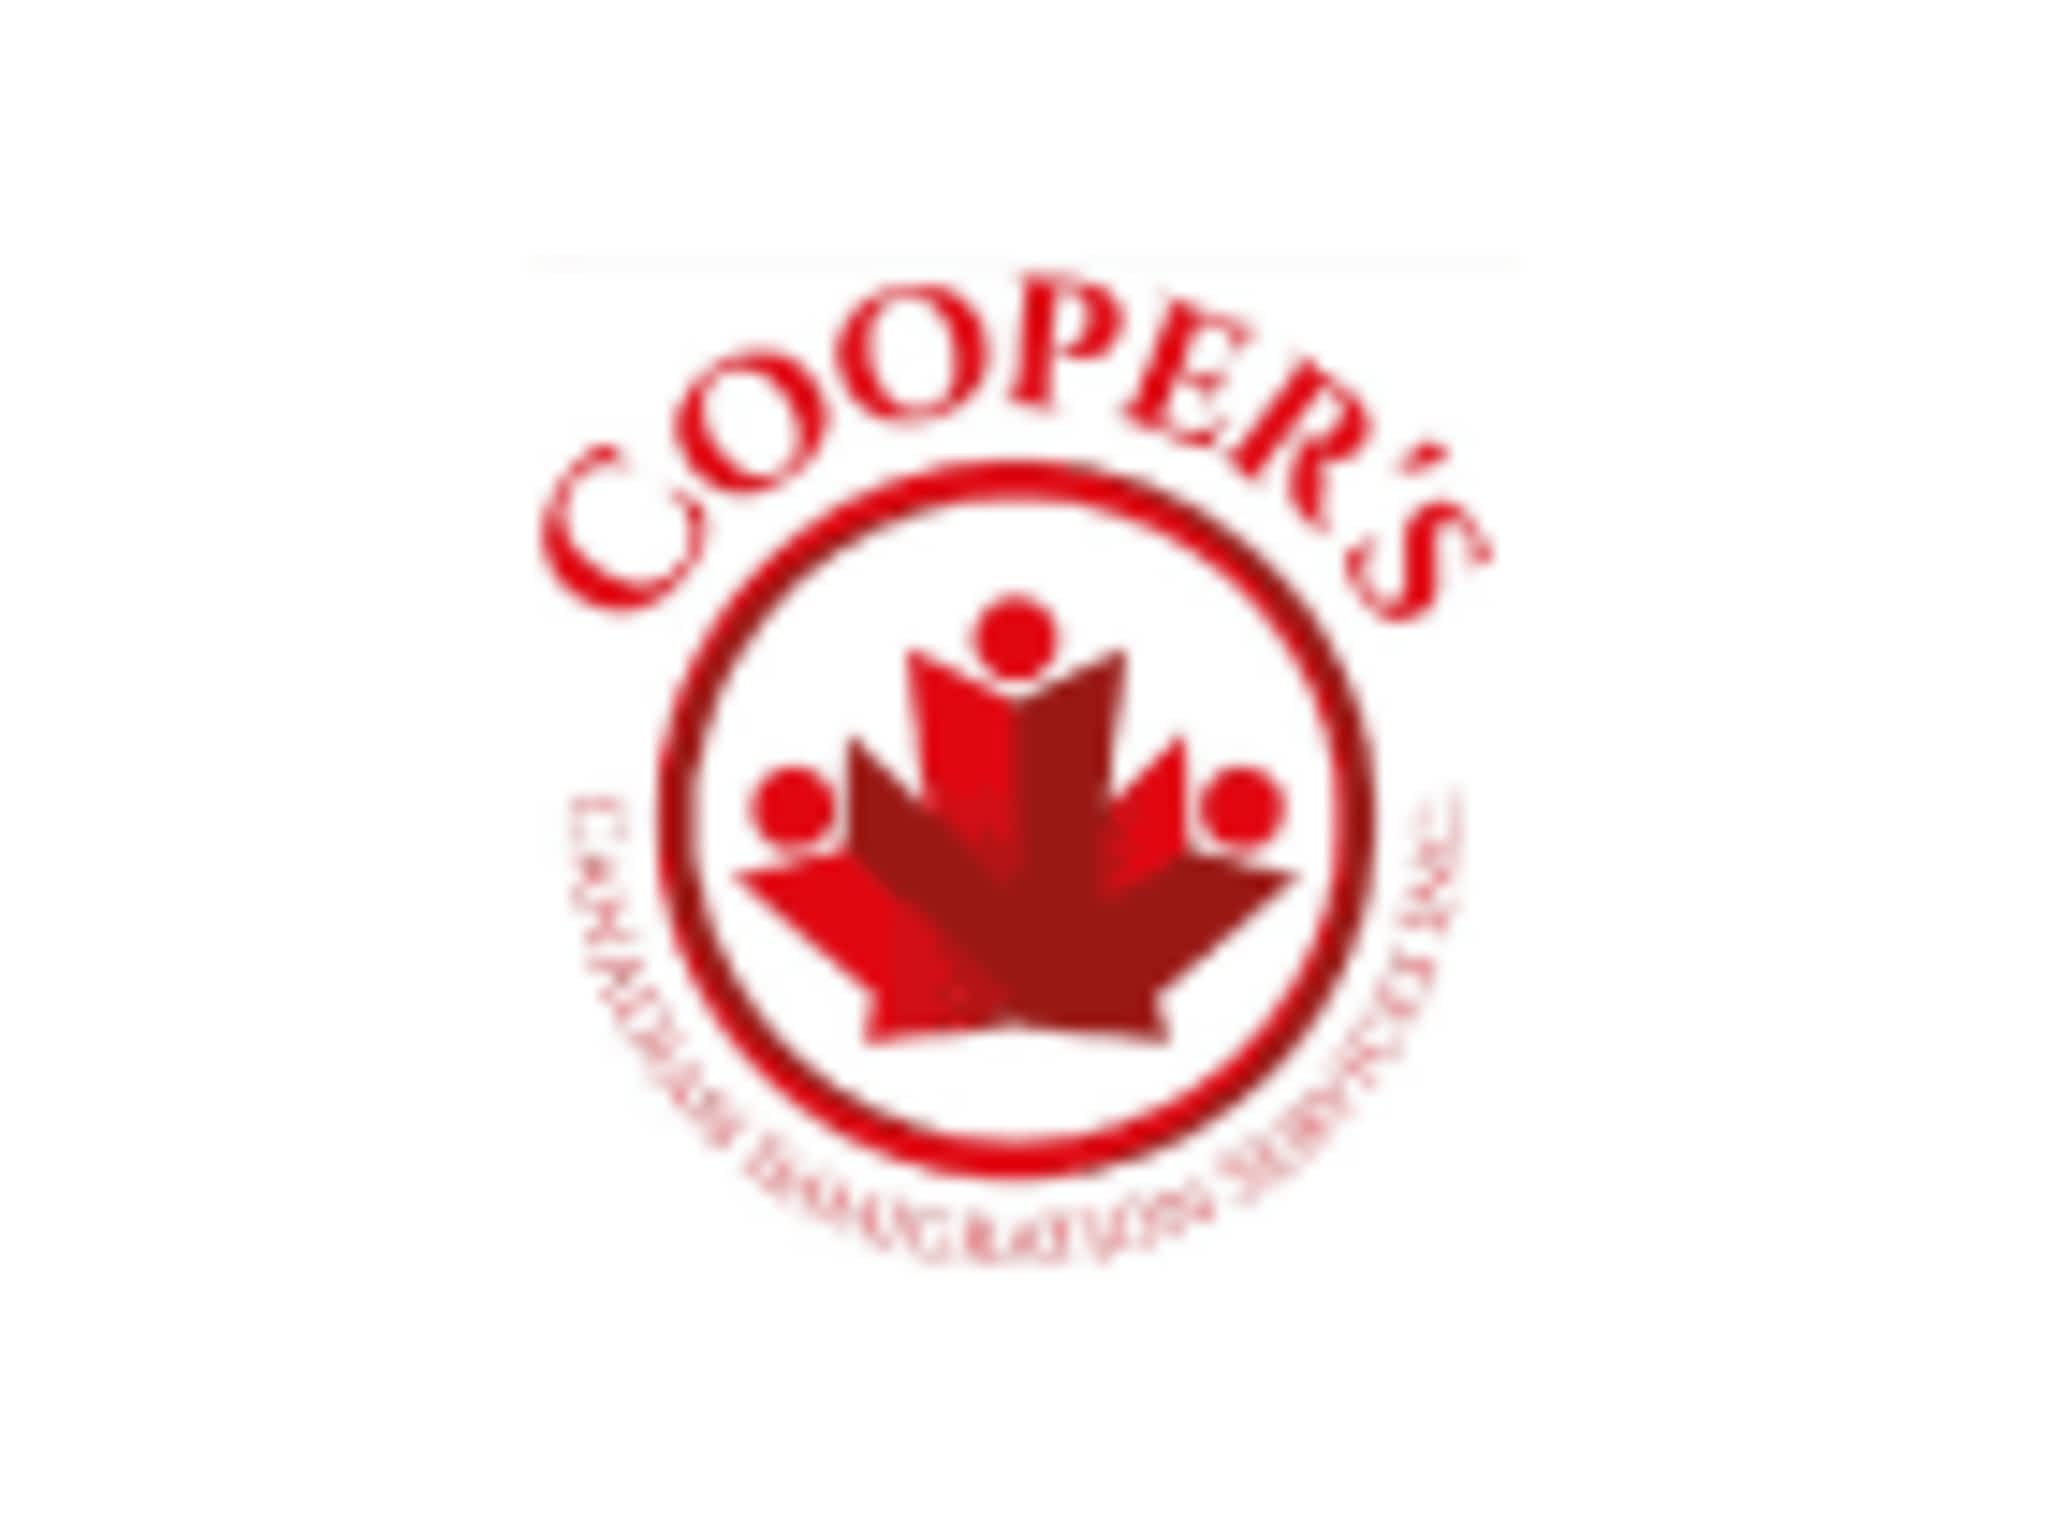 photo Cooper's Canadian Immigration Services Inc